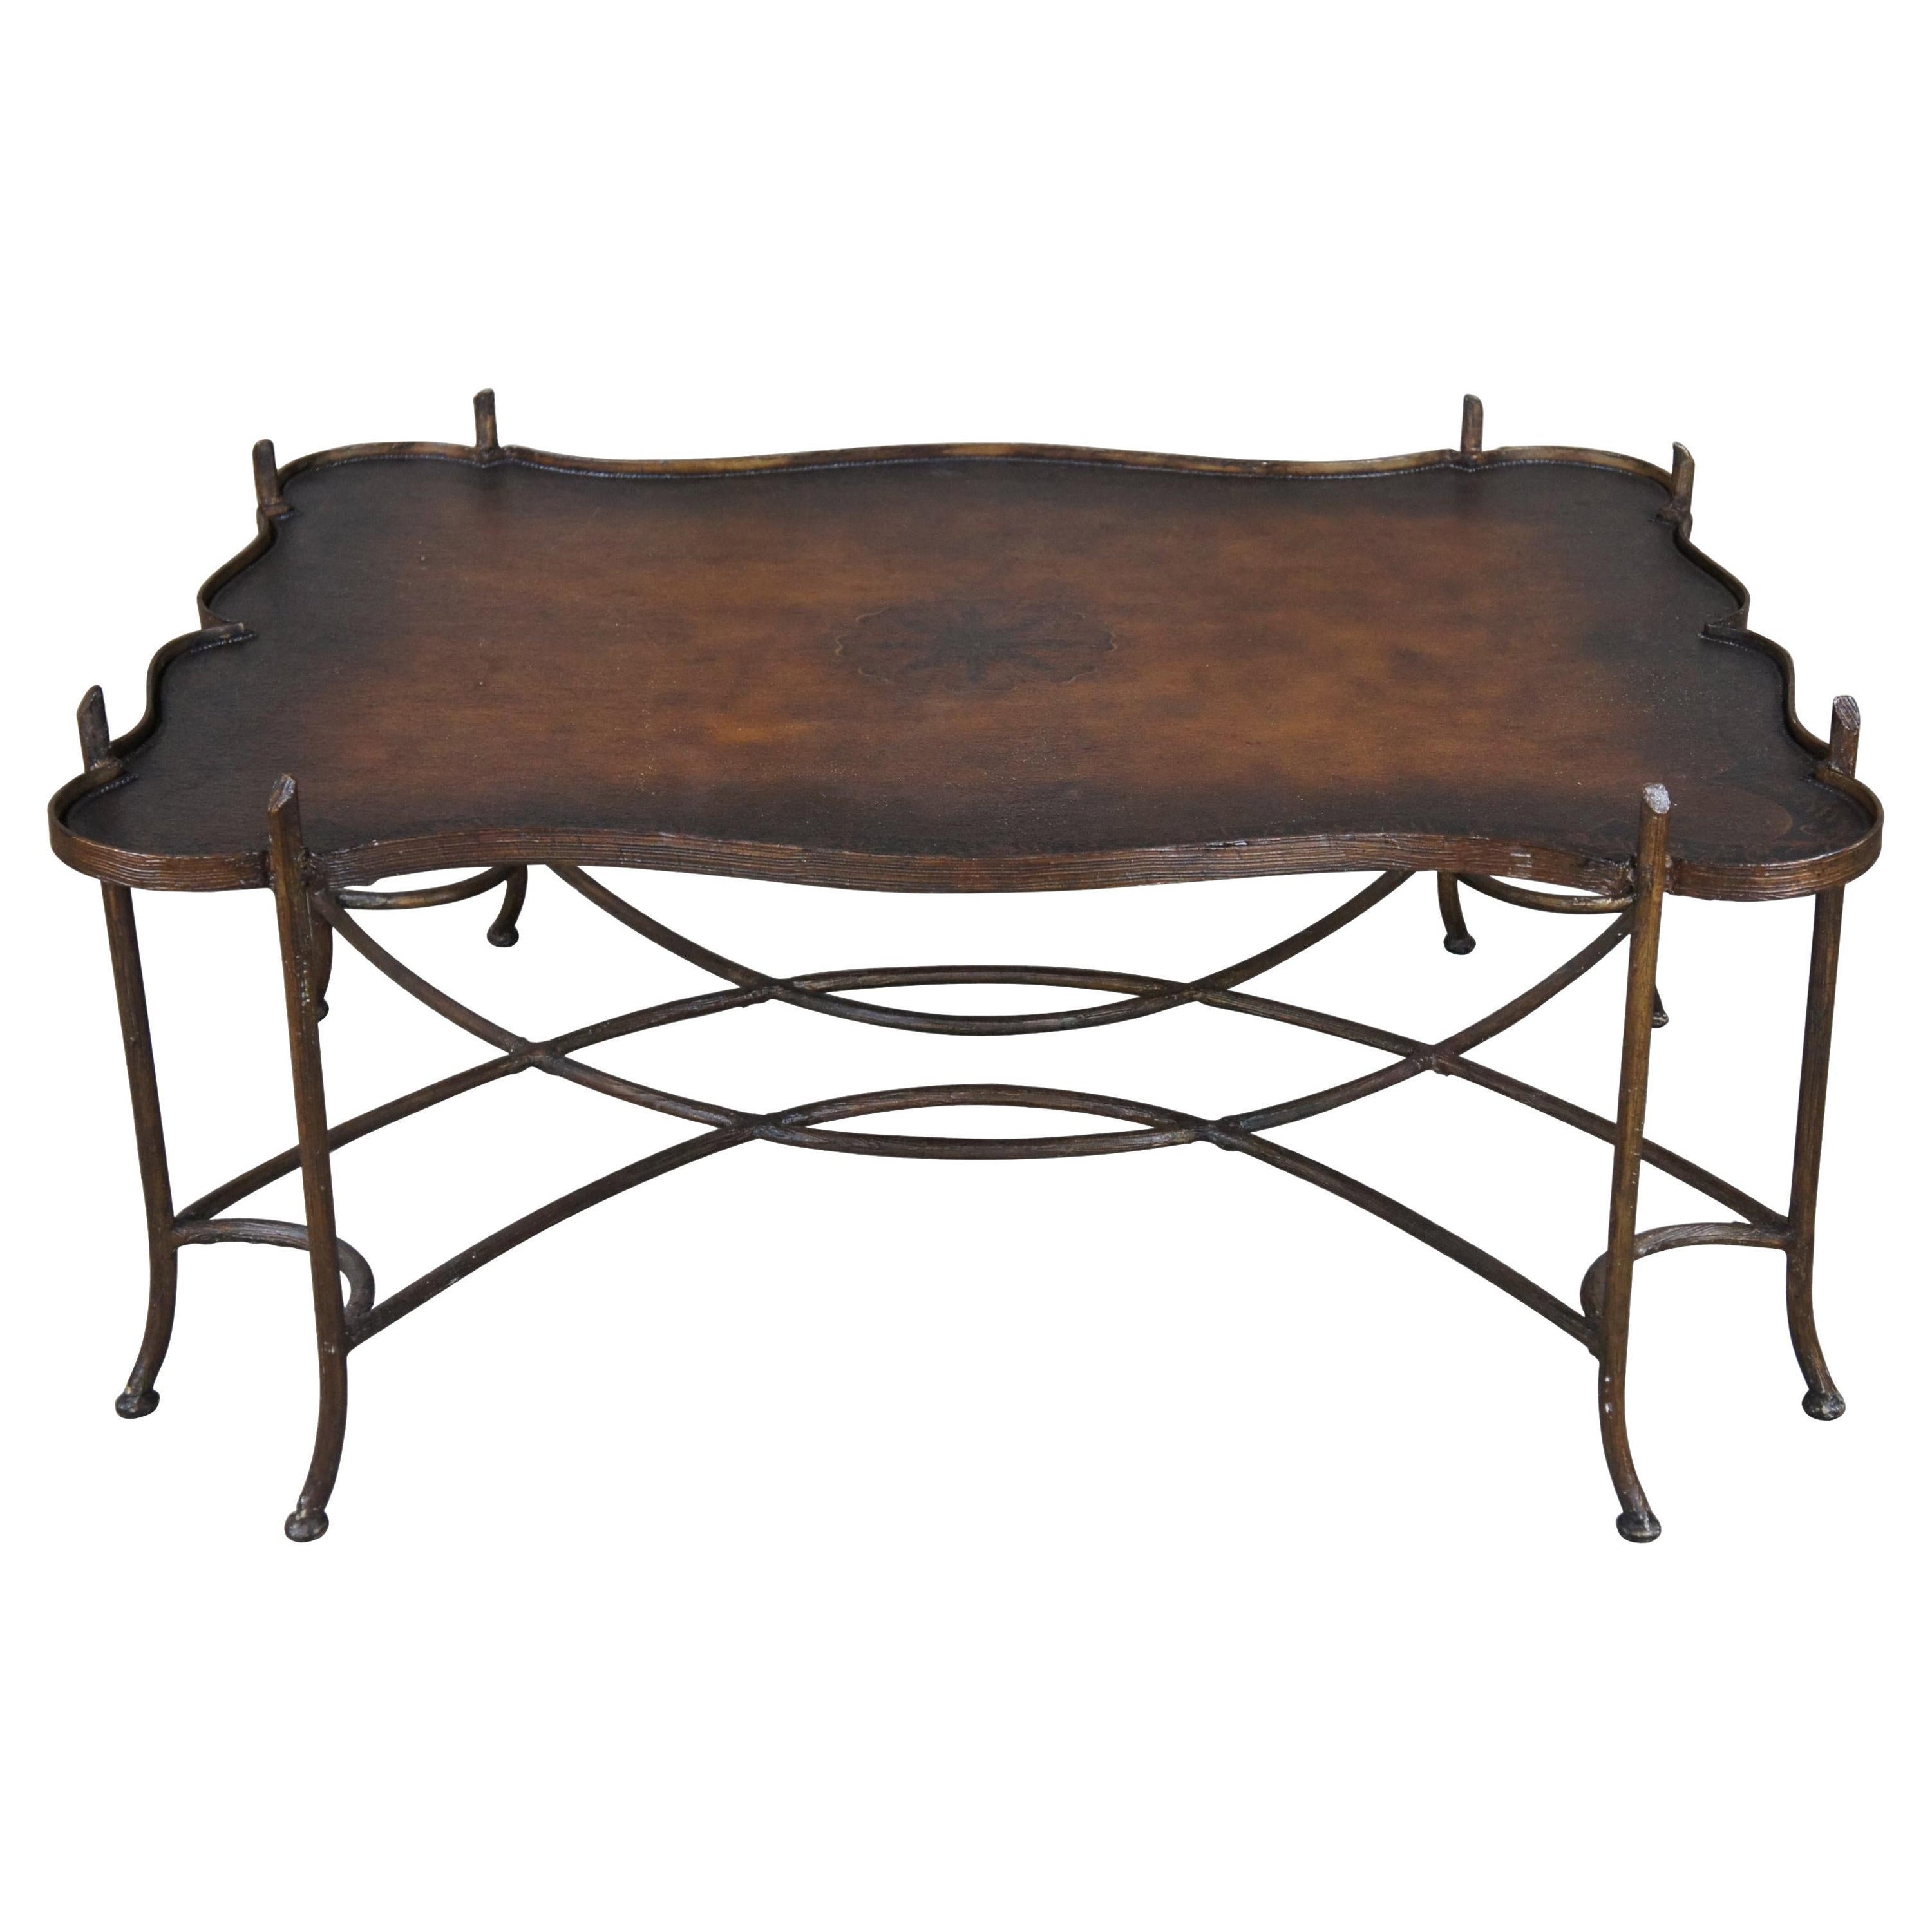 Maitland Smith Gilded Iron Faux Bois Coffee Table Tole Style Painted Tray Top